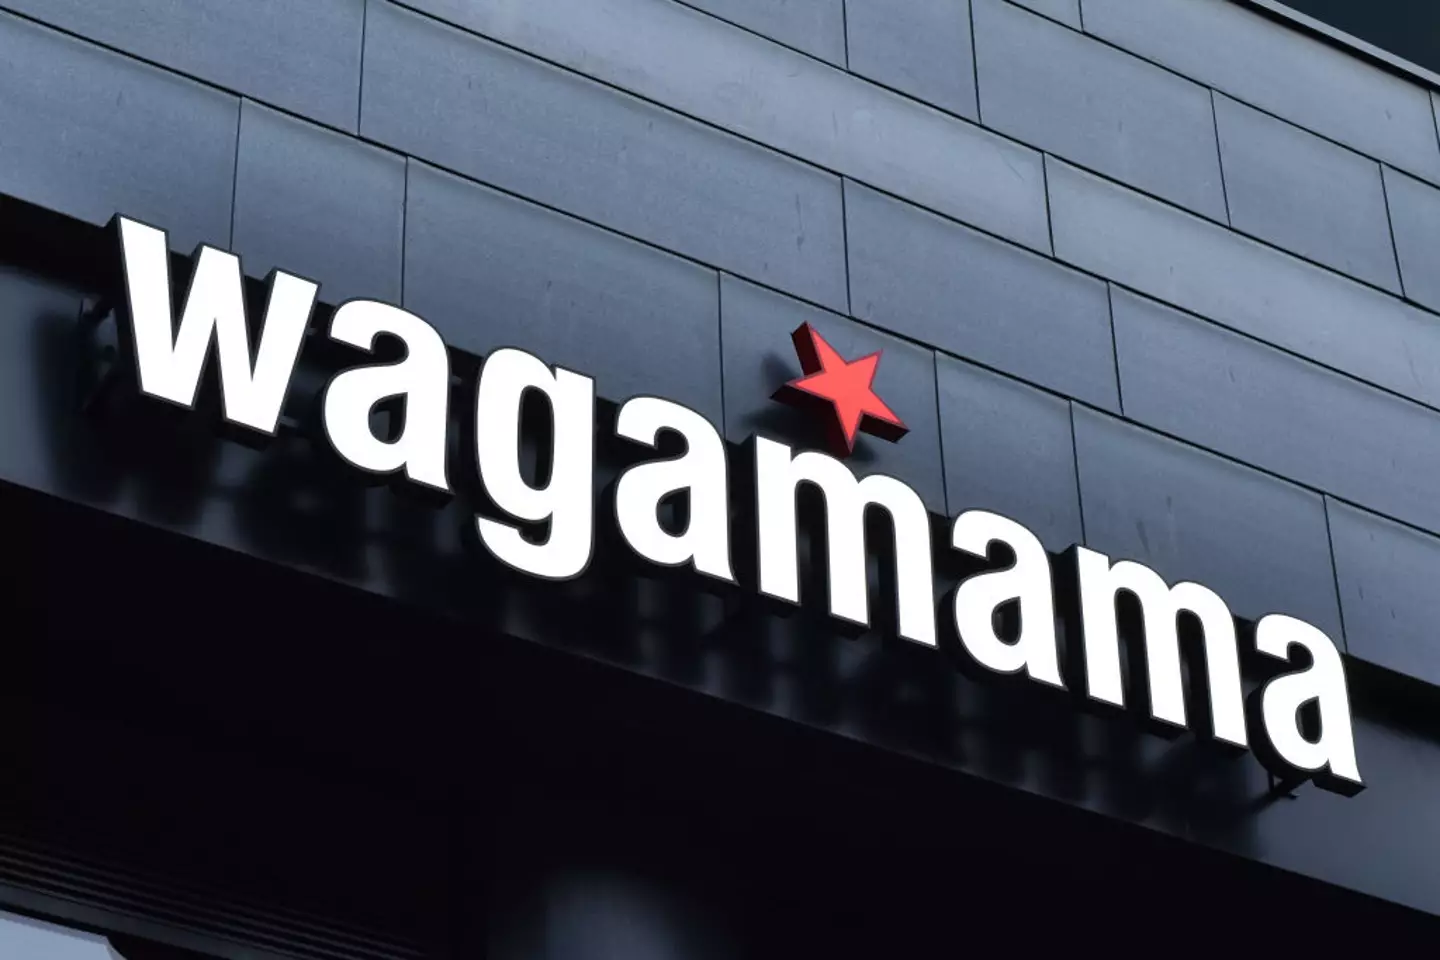 One new dish could provide a bit of healthy competition to Japanese restaurant chain Wagamama. (John Keeble/Getty Images)